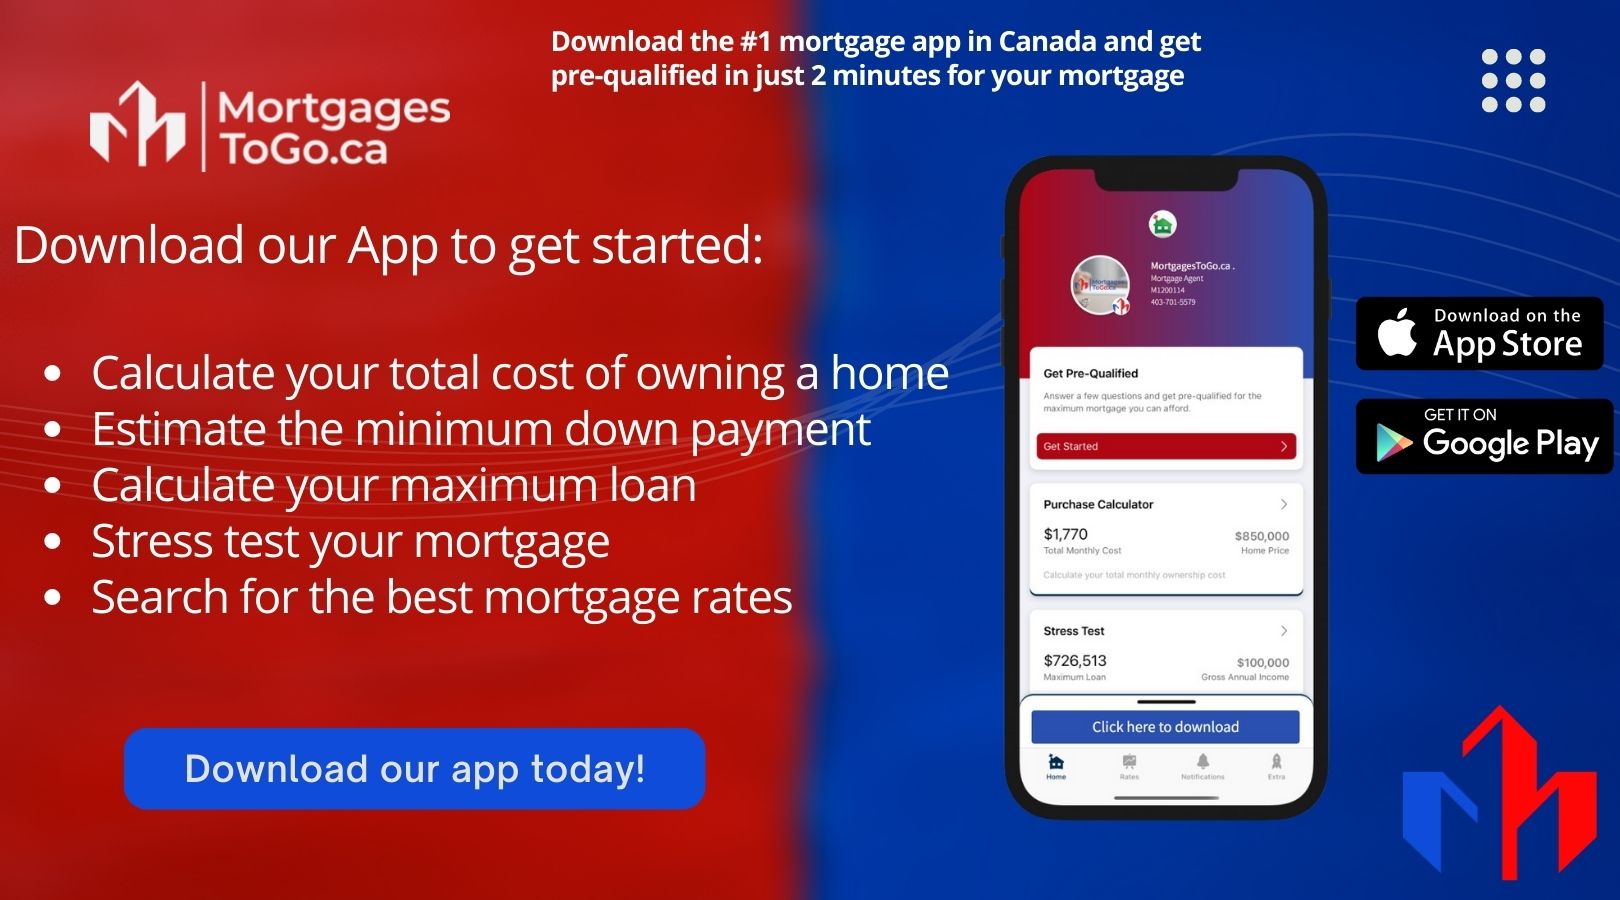 Download our mortgage calculator app and get pre-qualified in minutes